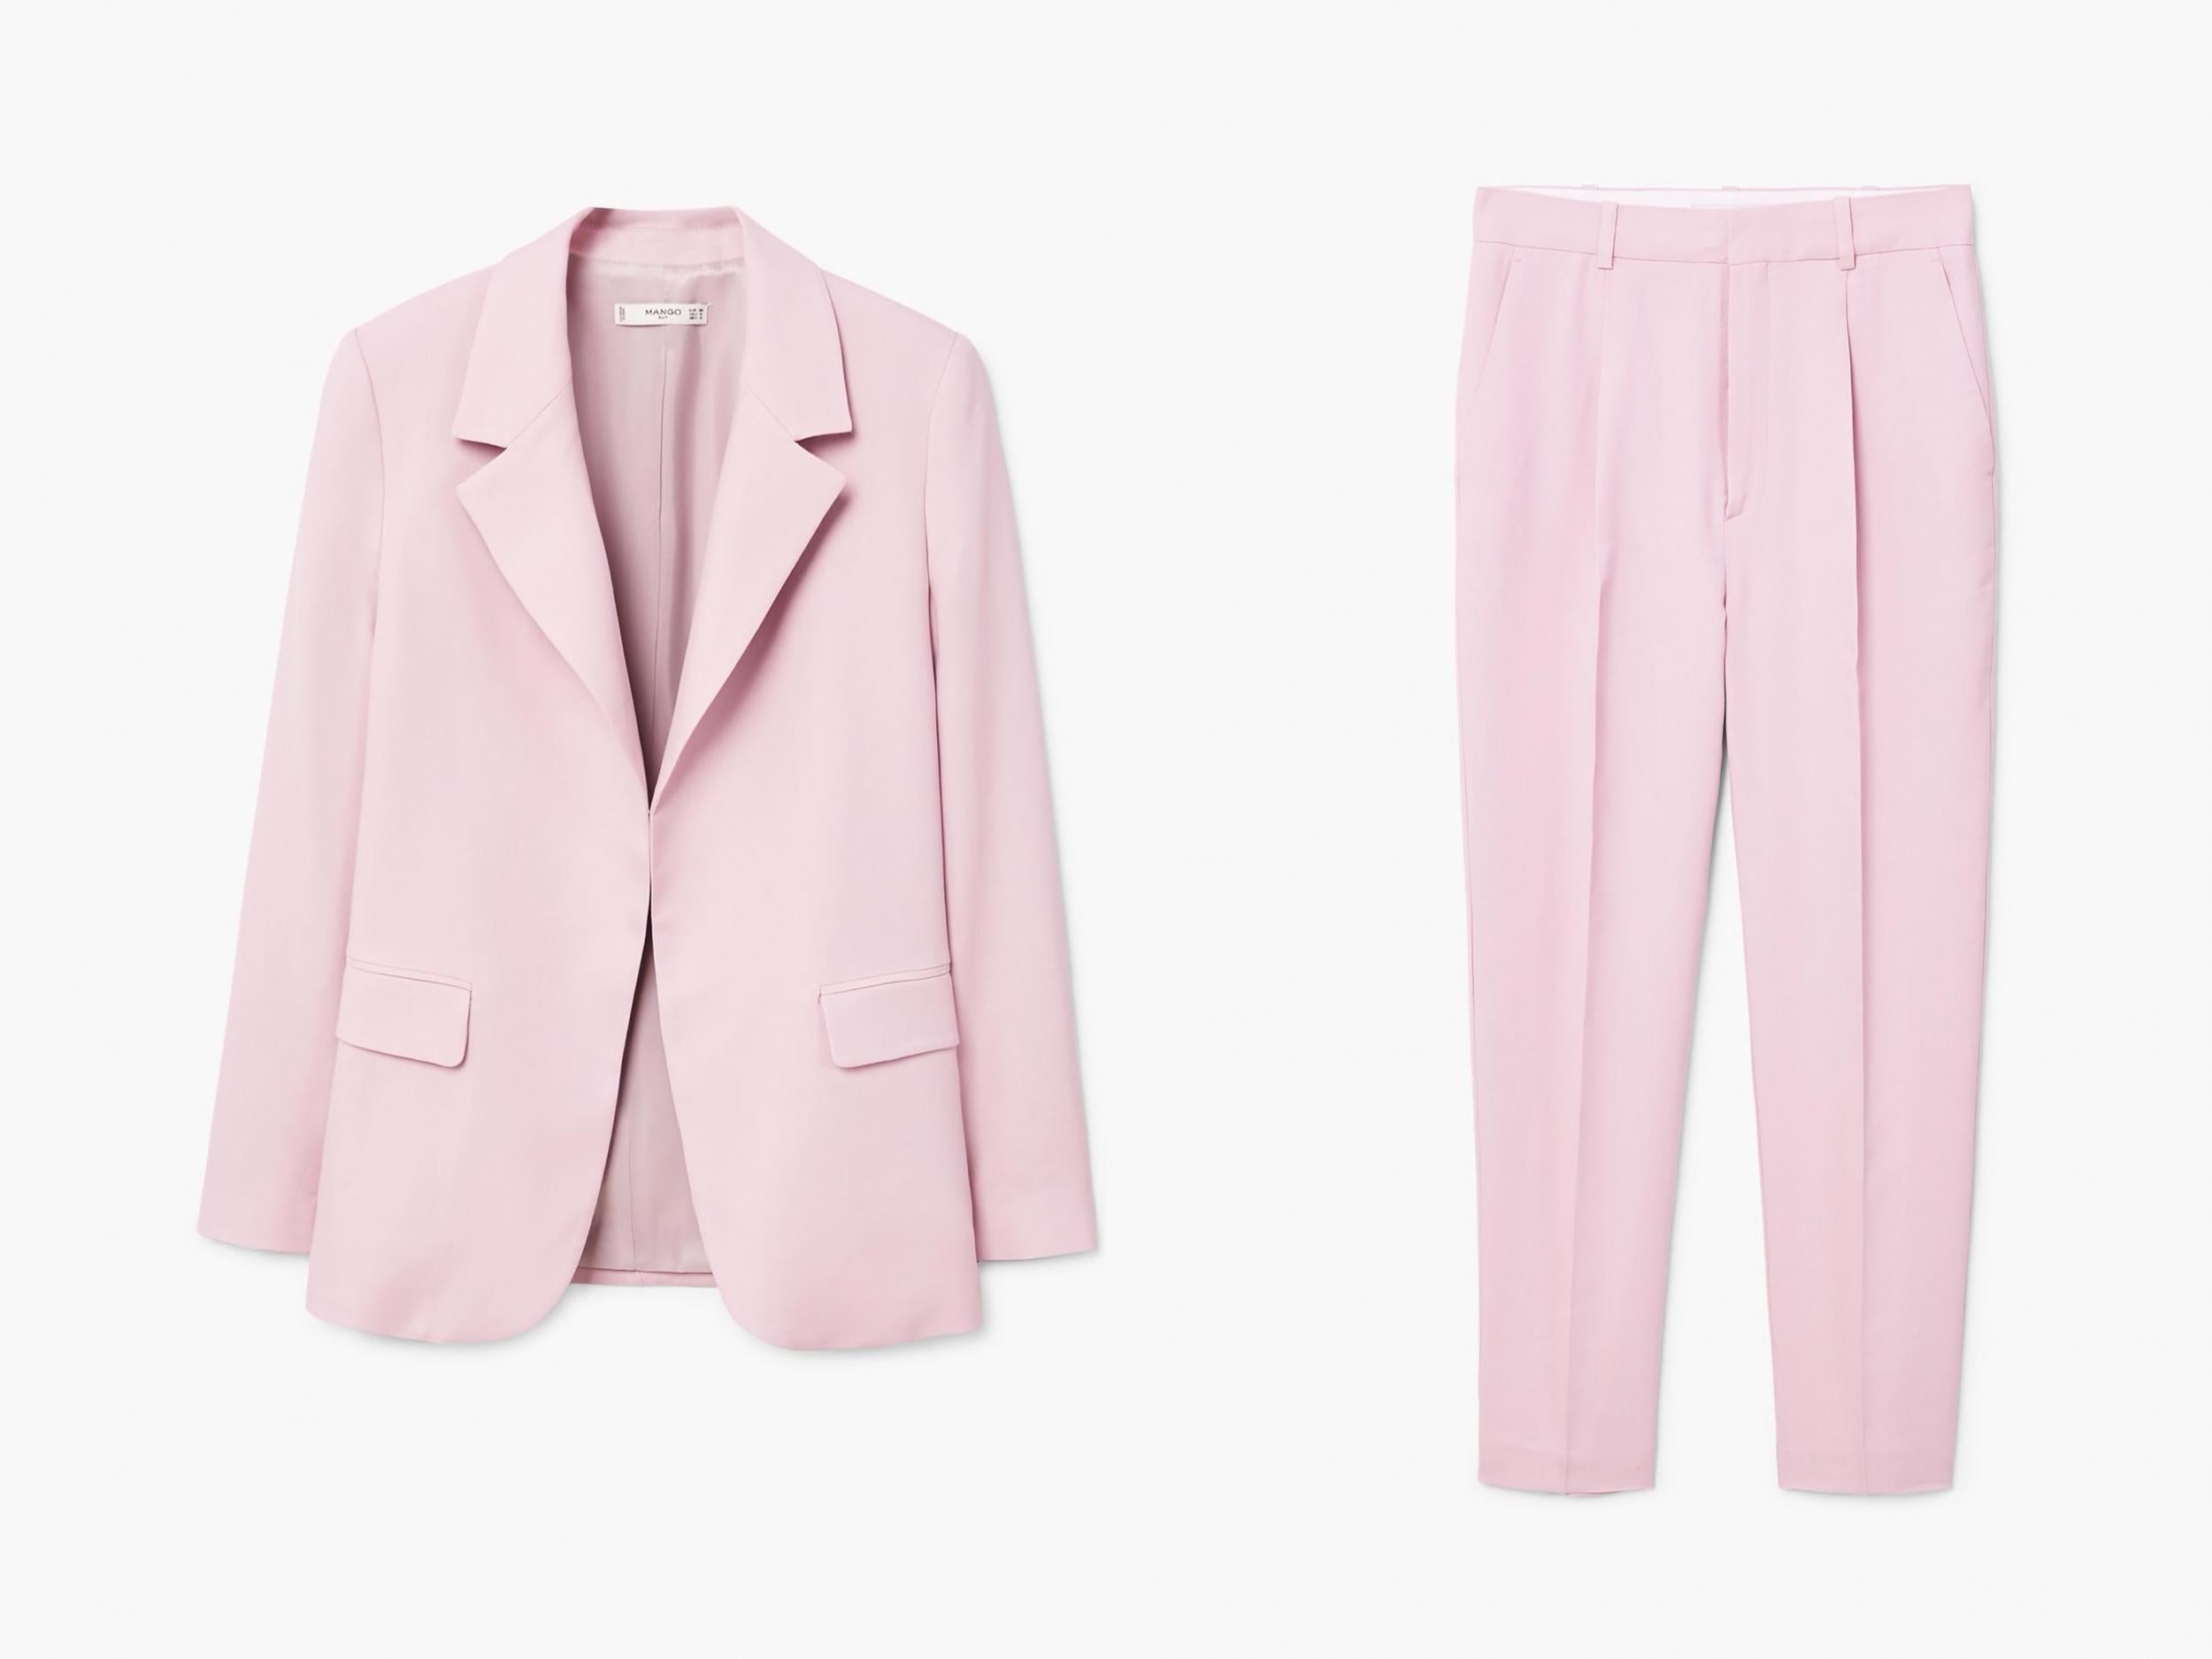 Mango blazer and trouser suit in hot pink